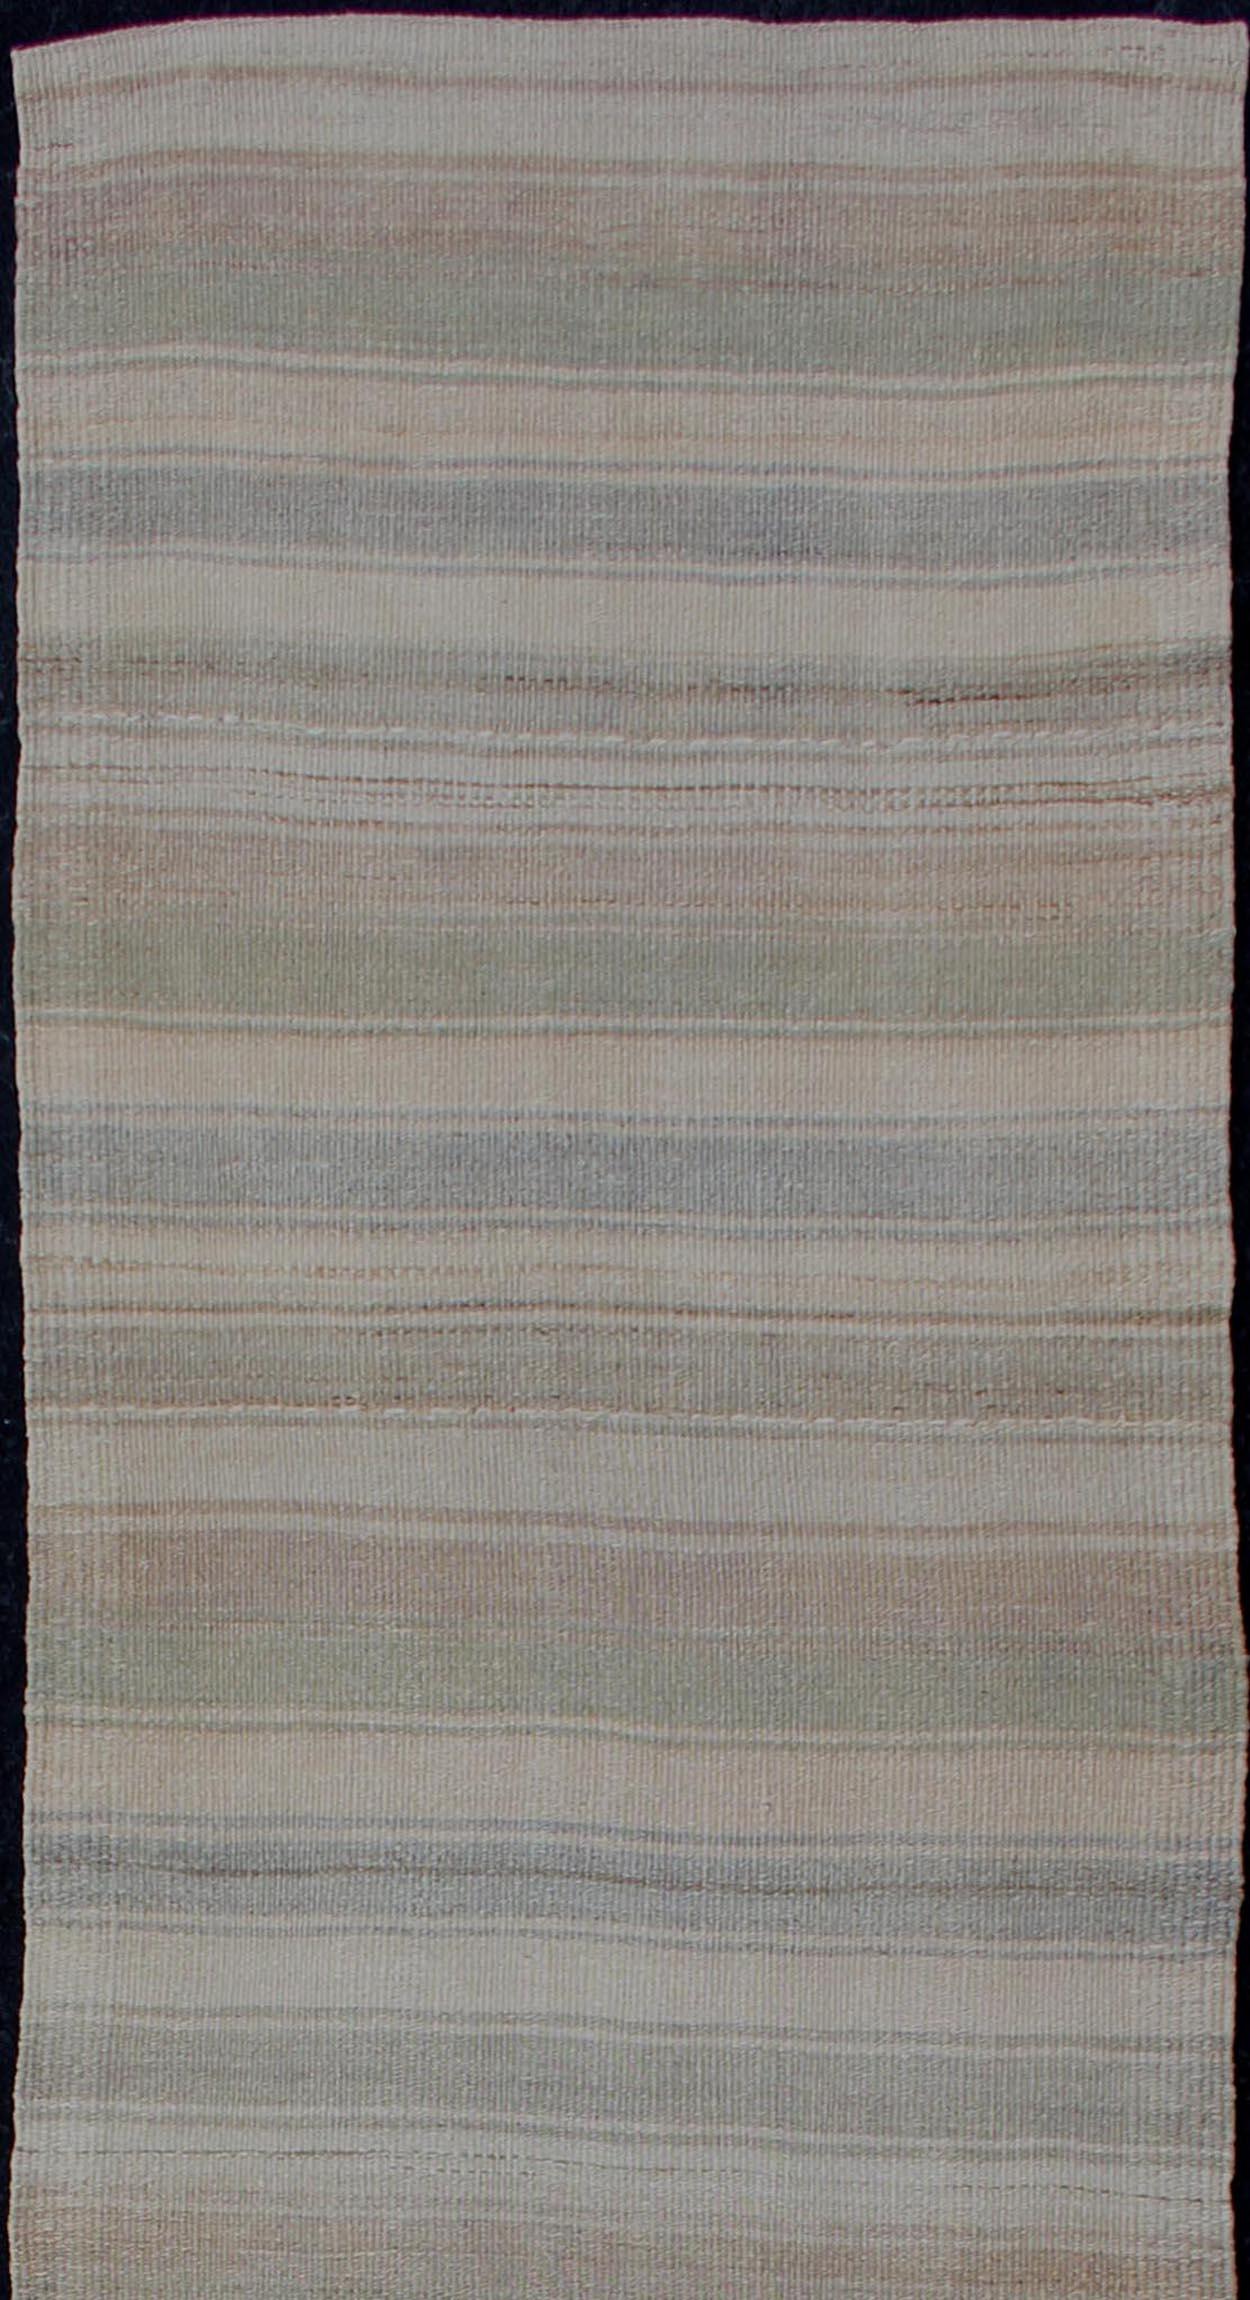 Vintage Kilim runner from Turkey with stripes, rug EN-179933, country of origin / type: Turkey / Kilim, circa 1960

This softly striped-design vintage runner from Turkey features a modern look, rendered in taupe, gray, blue, tan, light brown and